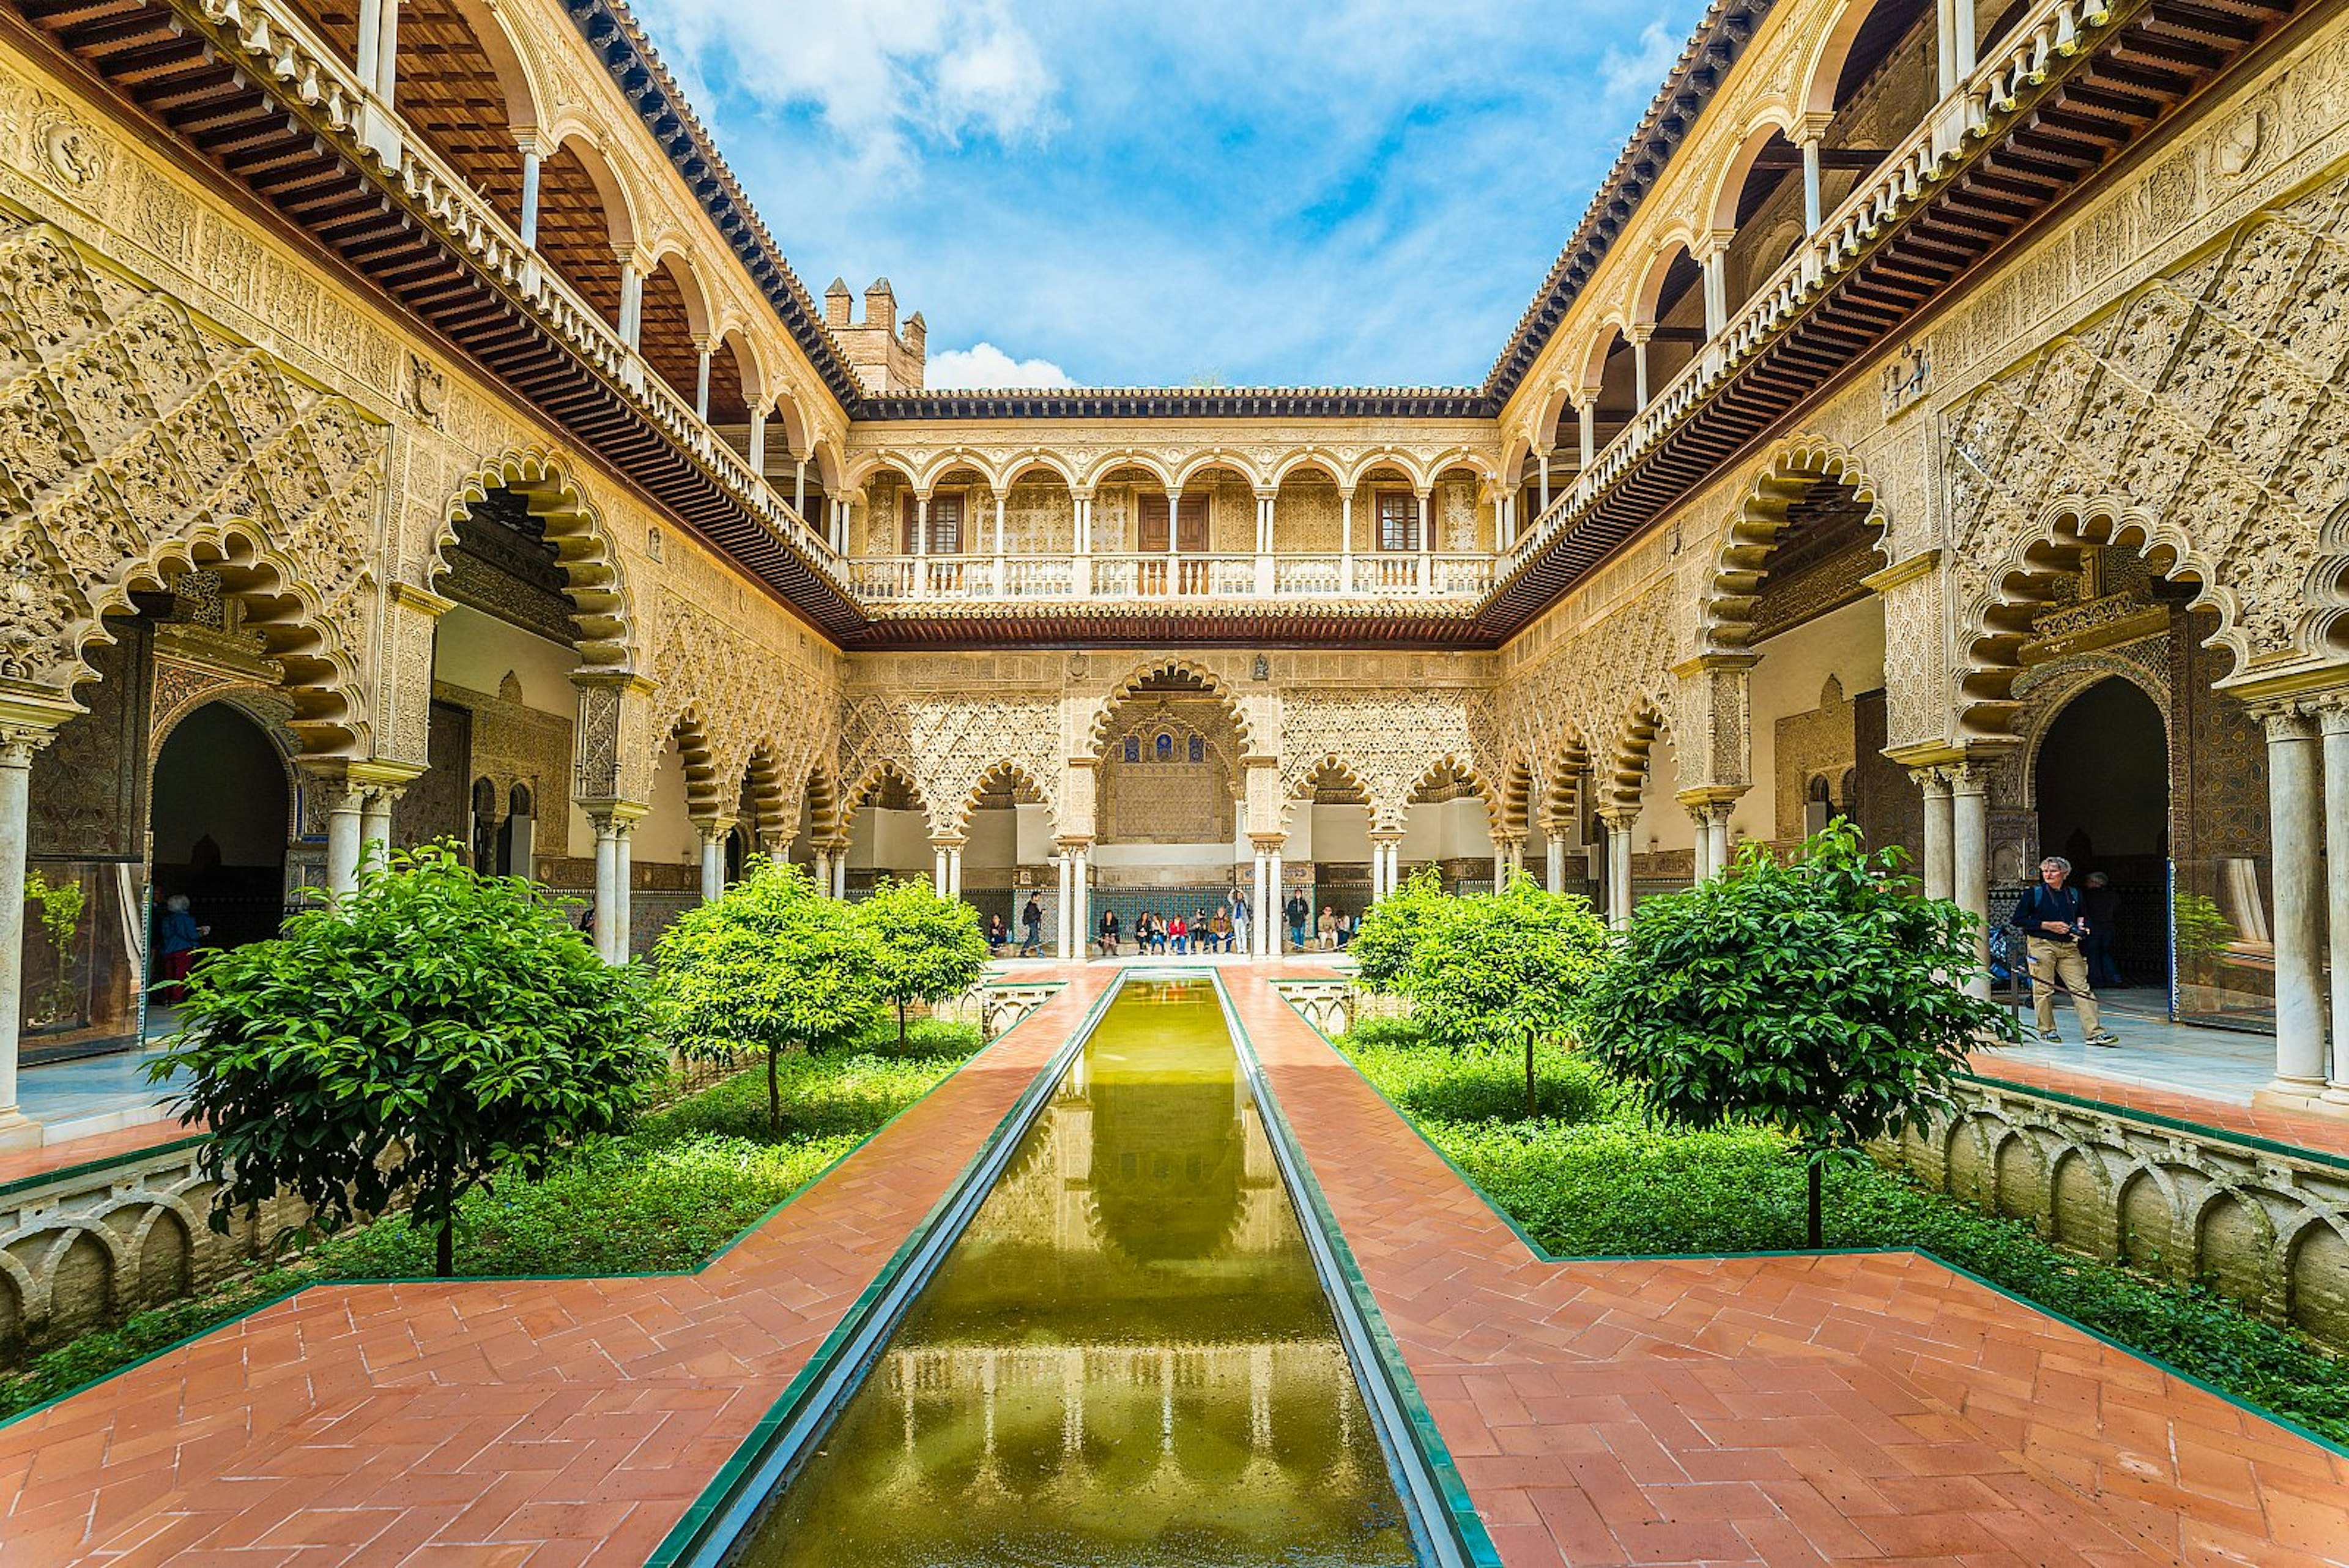 A courtyard inside Seville's Real Alcázar, surrounded by ornate gilded arches, plasterwork and tiling with a sunken garden and long thin pool in the centre.